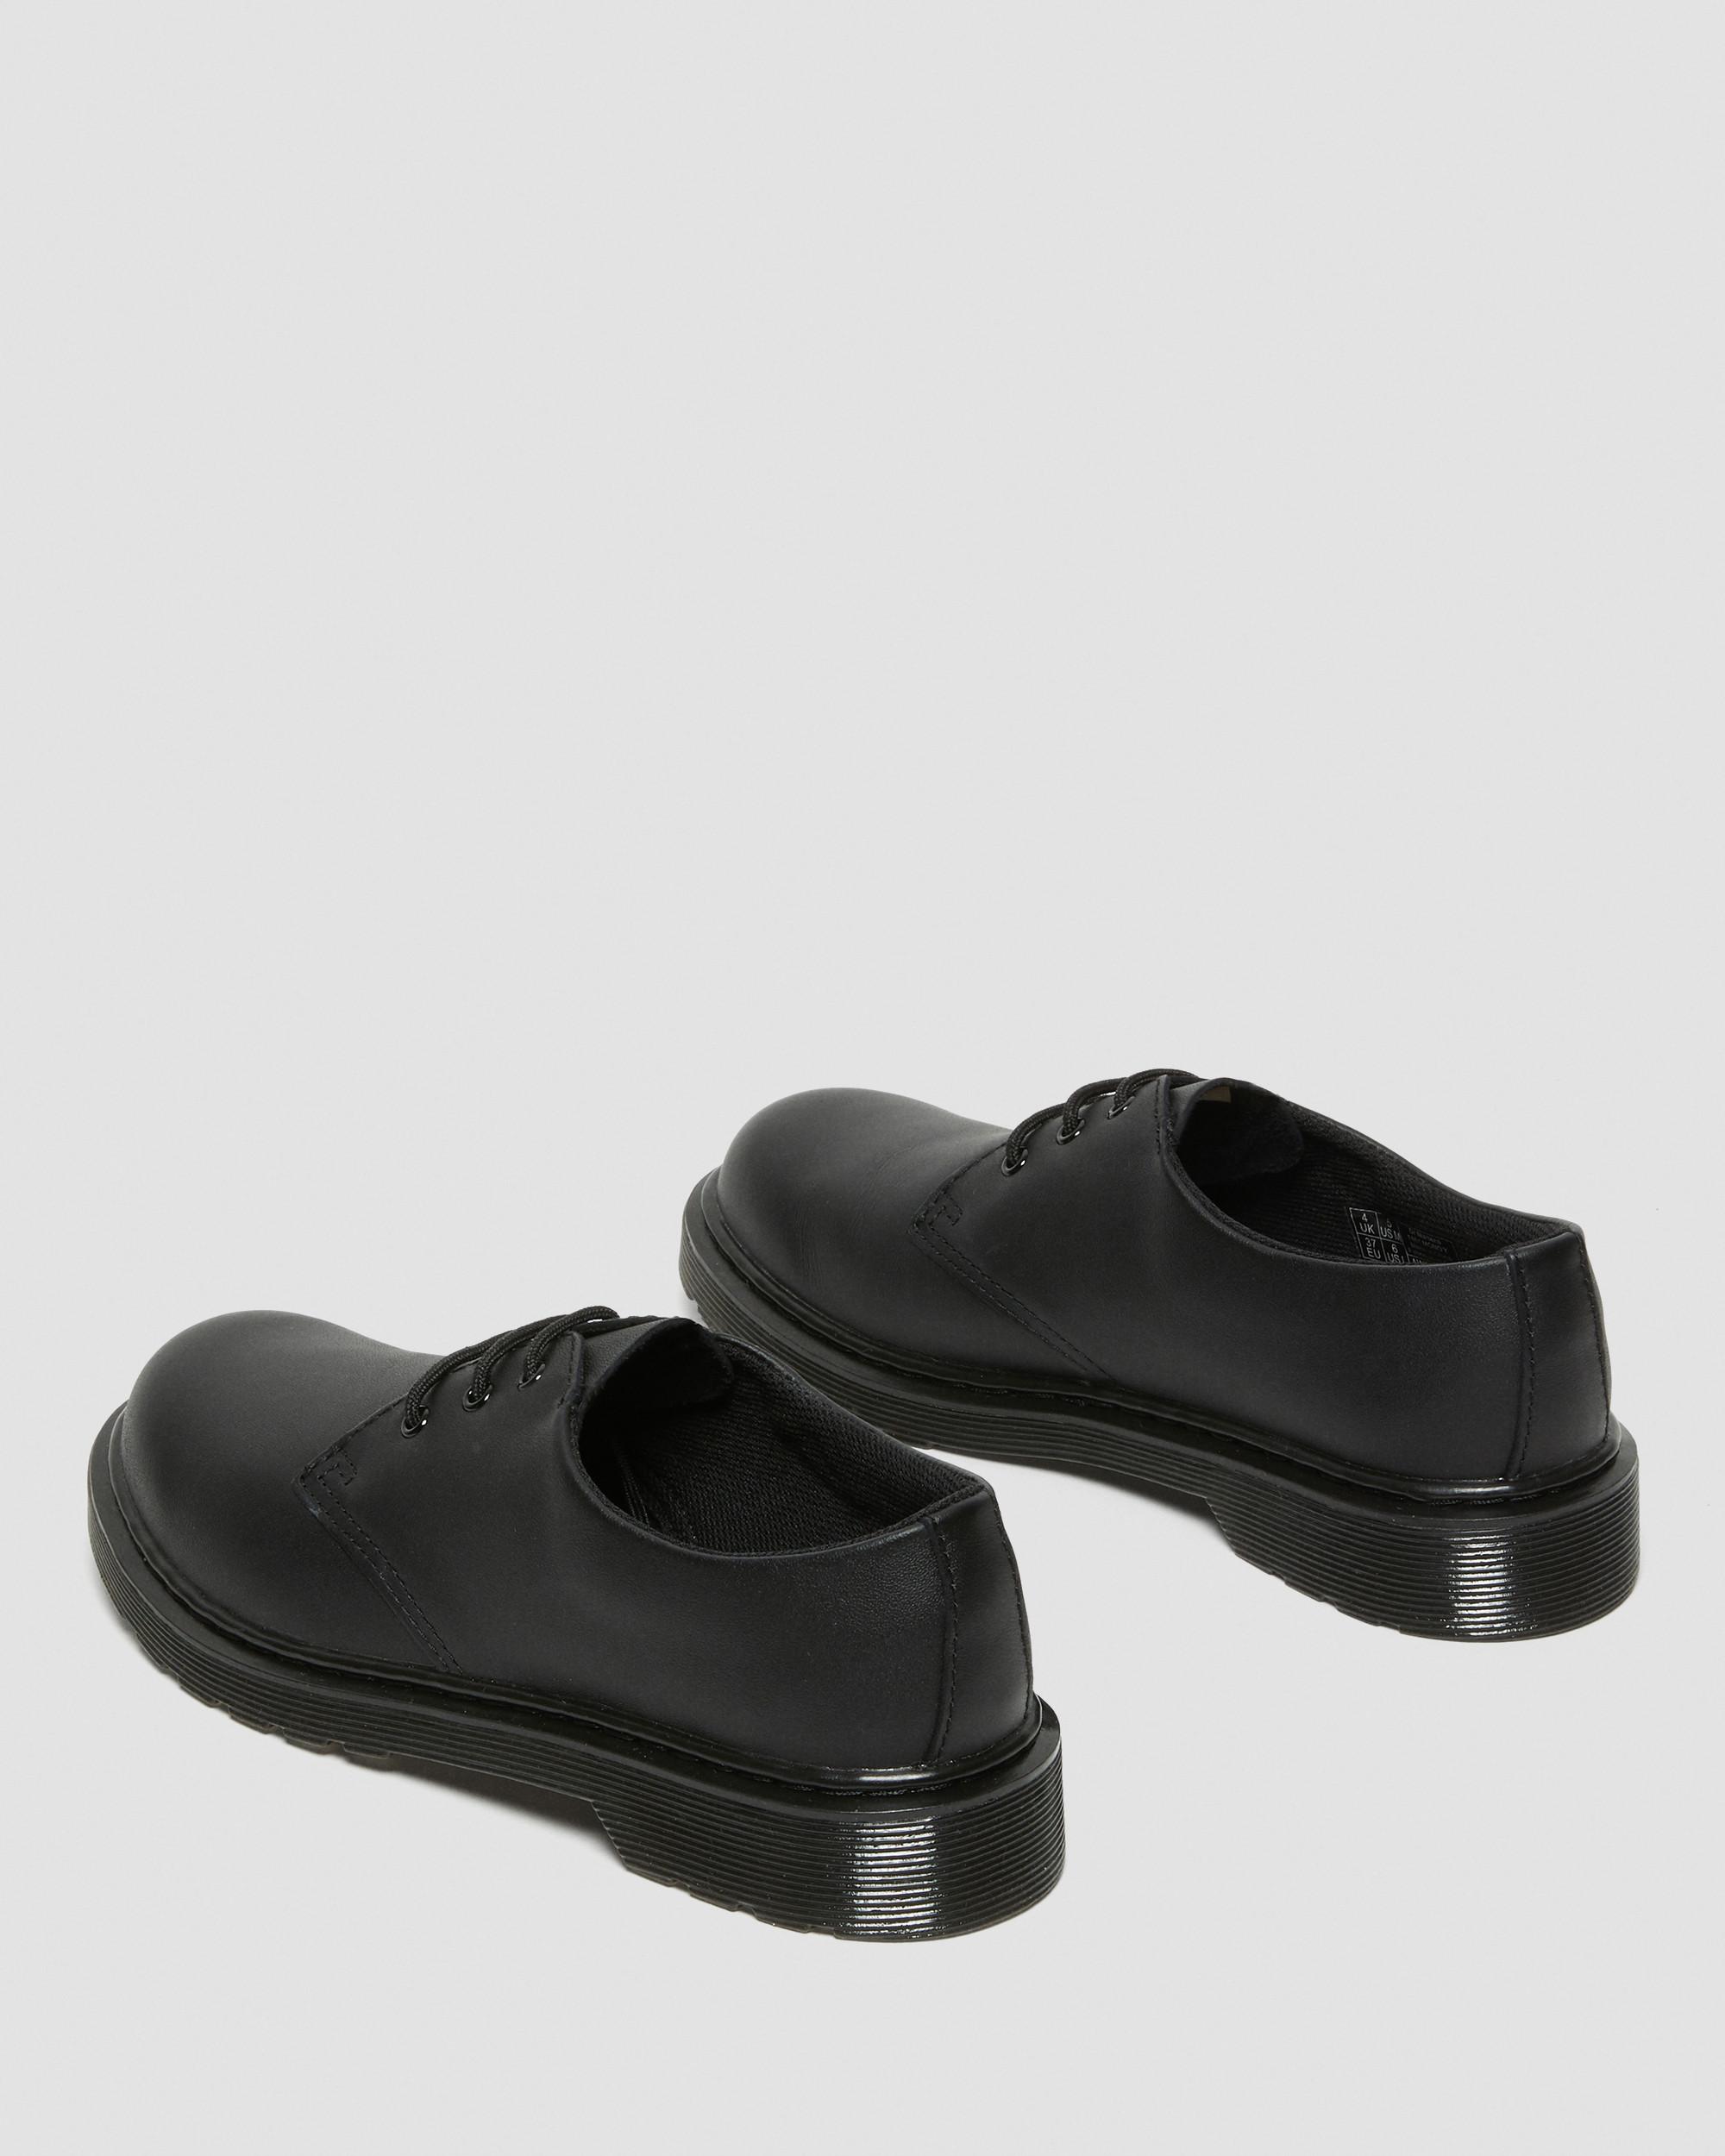 YOUTH 1461 MONO SOFTY T LEATHER SHOES | Dr. Martens